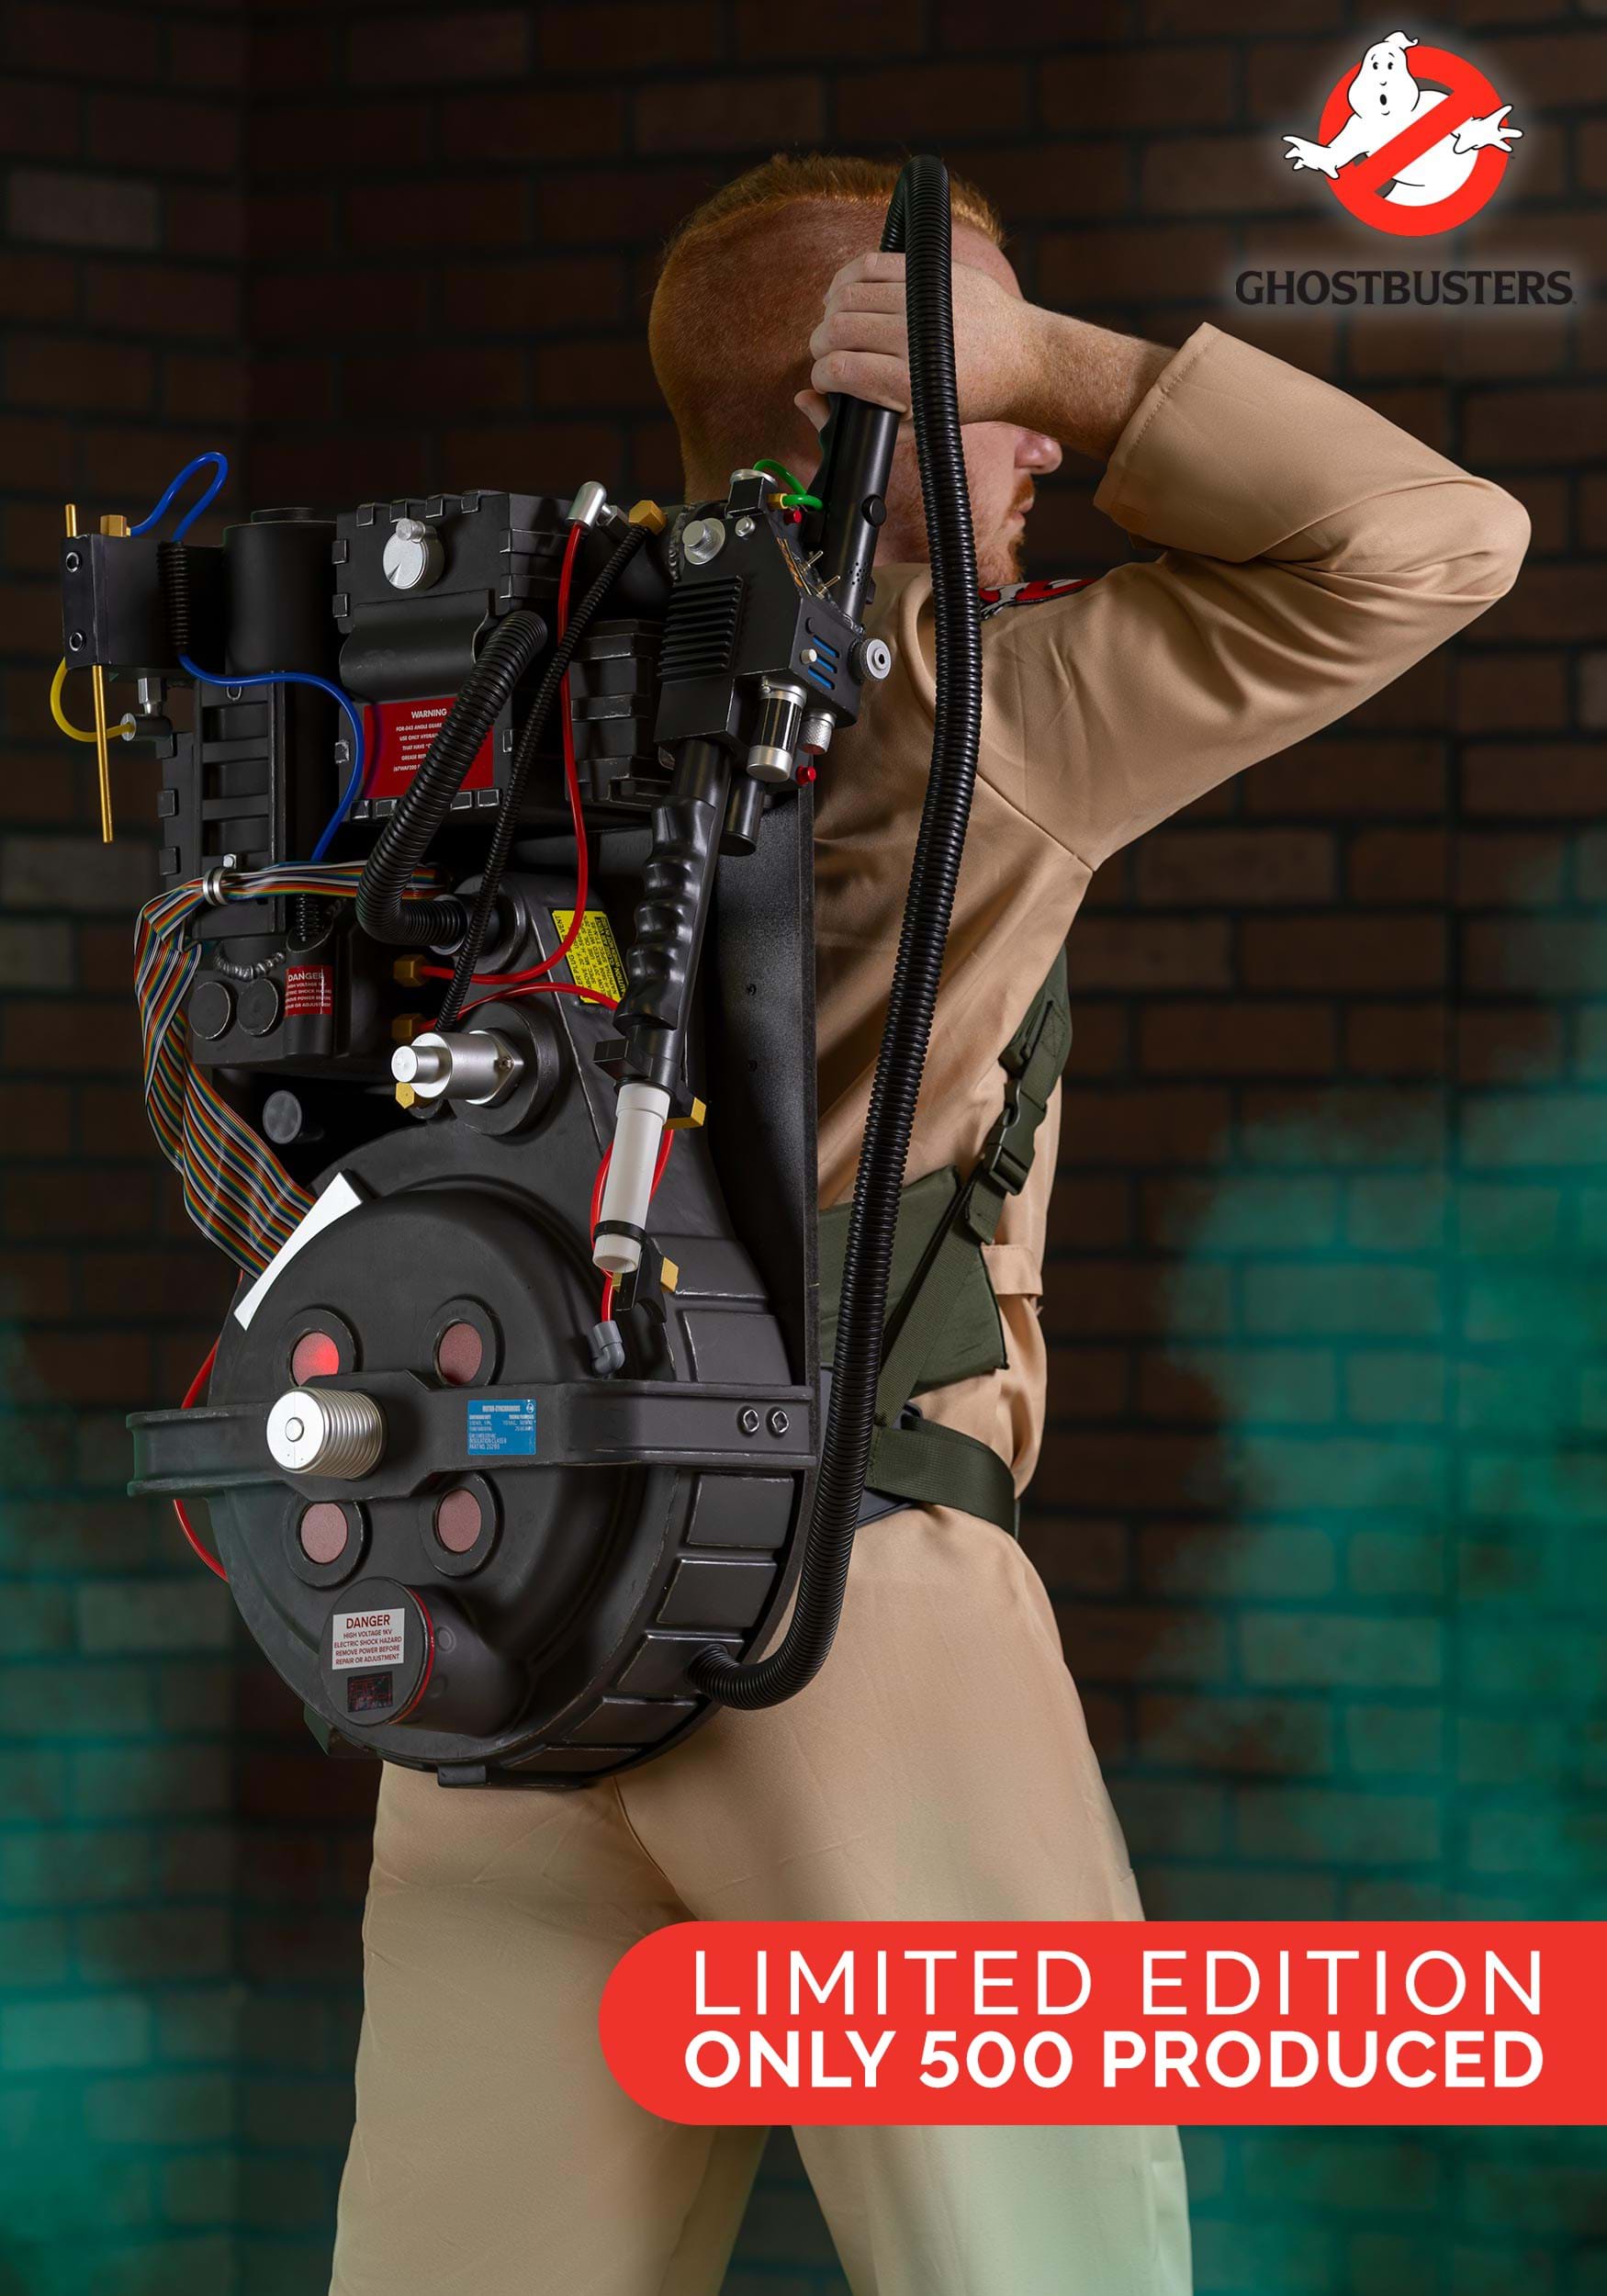 https://images.halloweencostumes.com/products/56300/1-1/ghostbusters-costume-replica-proton-pack-le.jpg